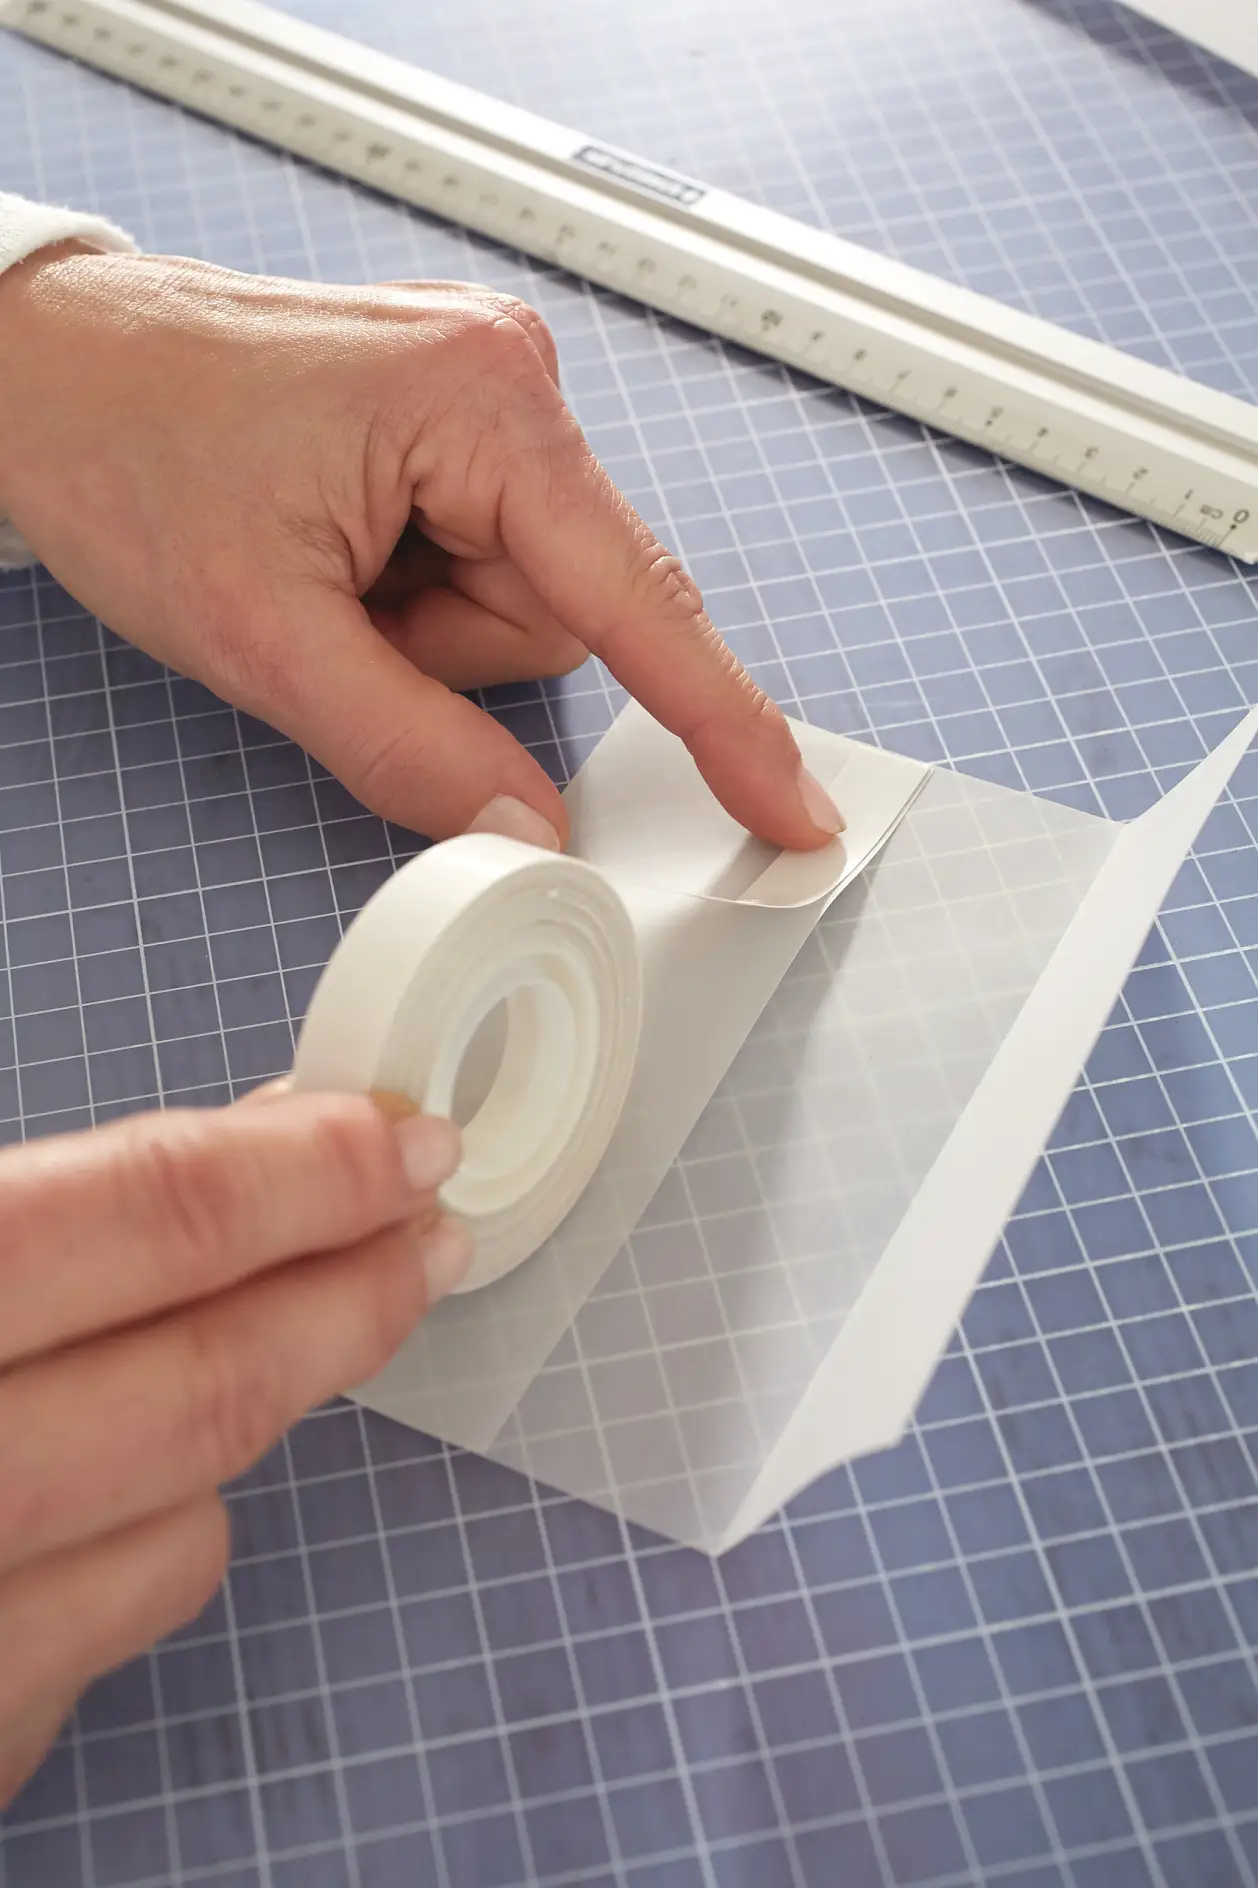 Apply a strip of double-sided adhesive tape.